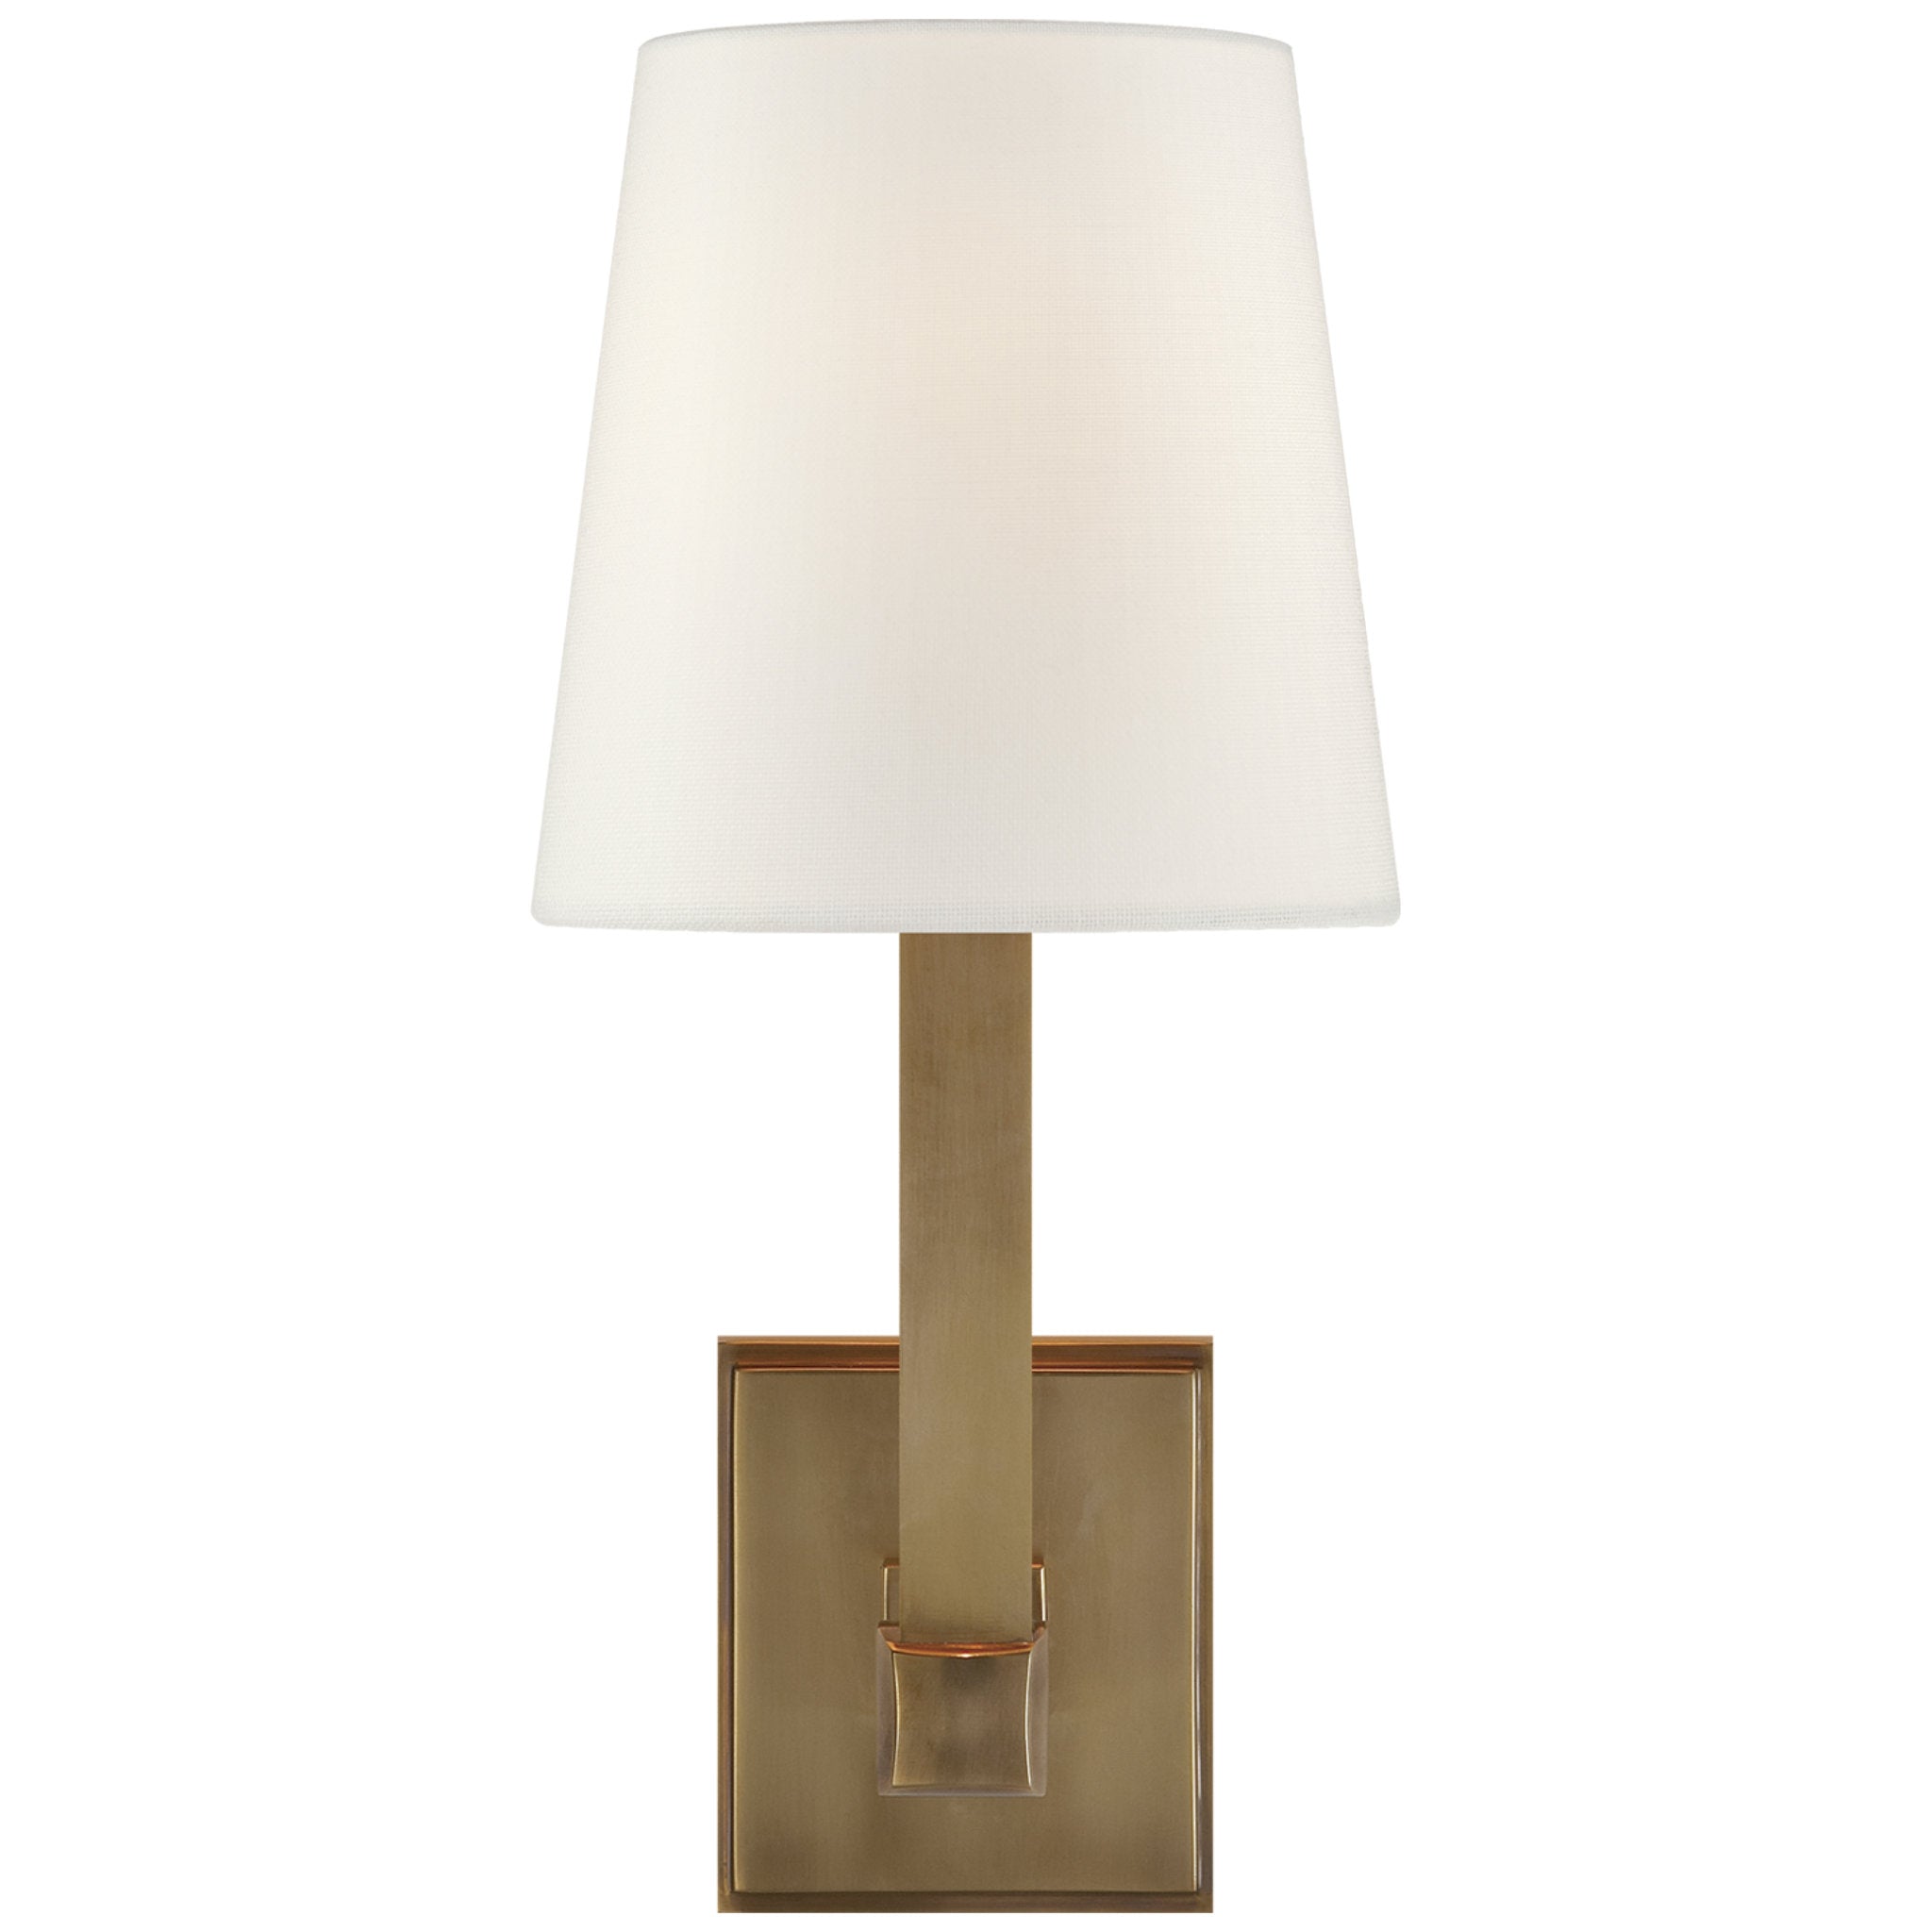 Chapman & Myers Square Tube Single Sconce in Hand-Rubbed Antique Brass with Linen Shade